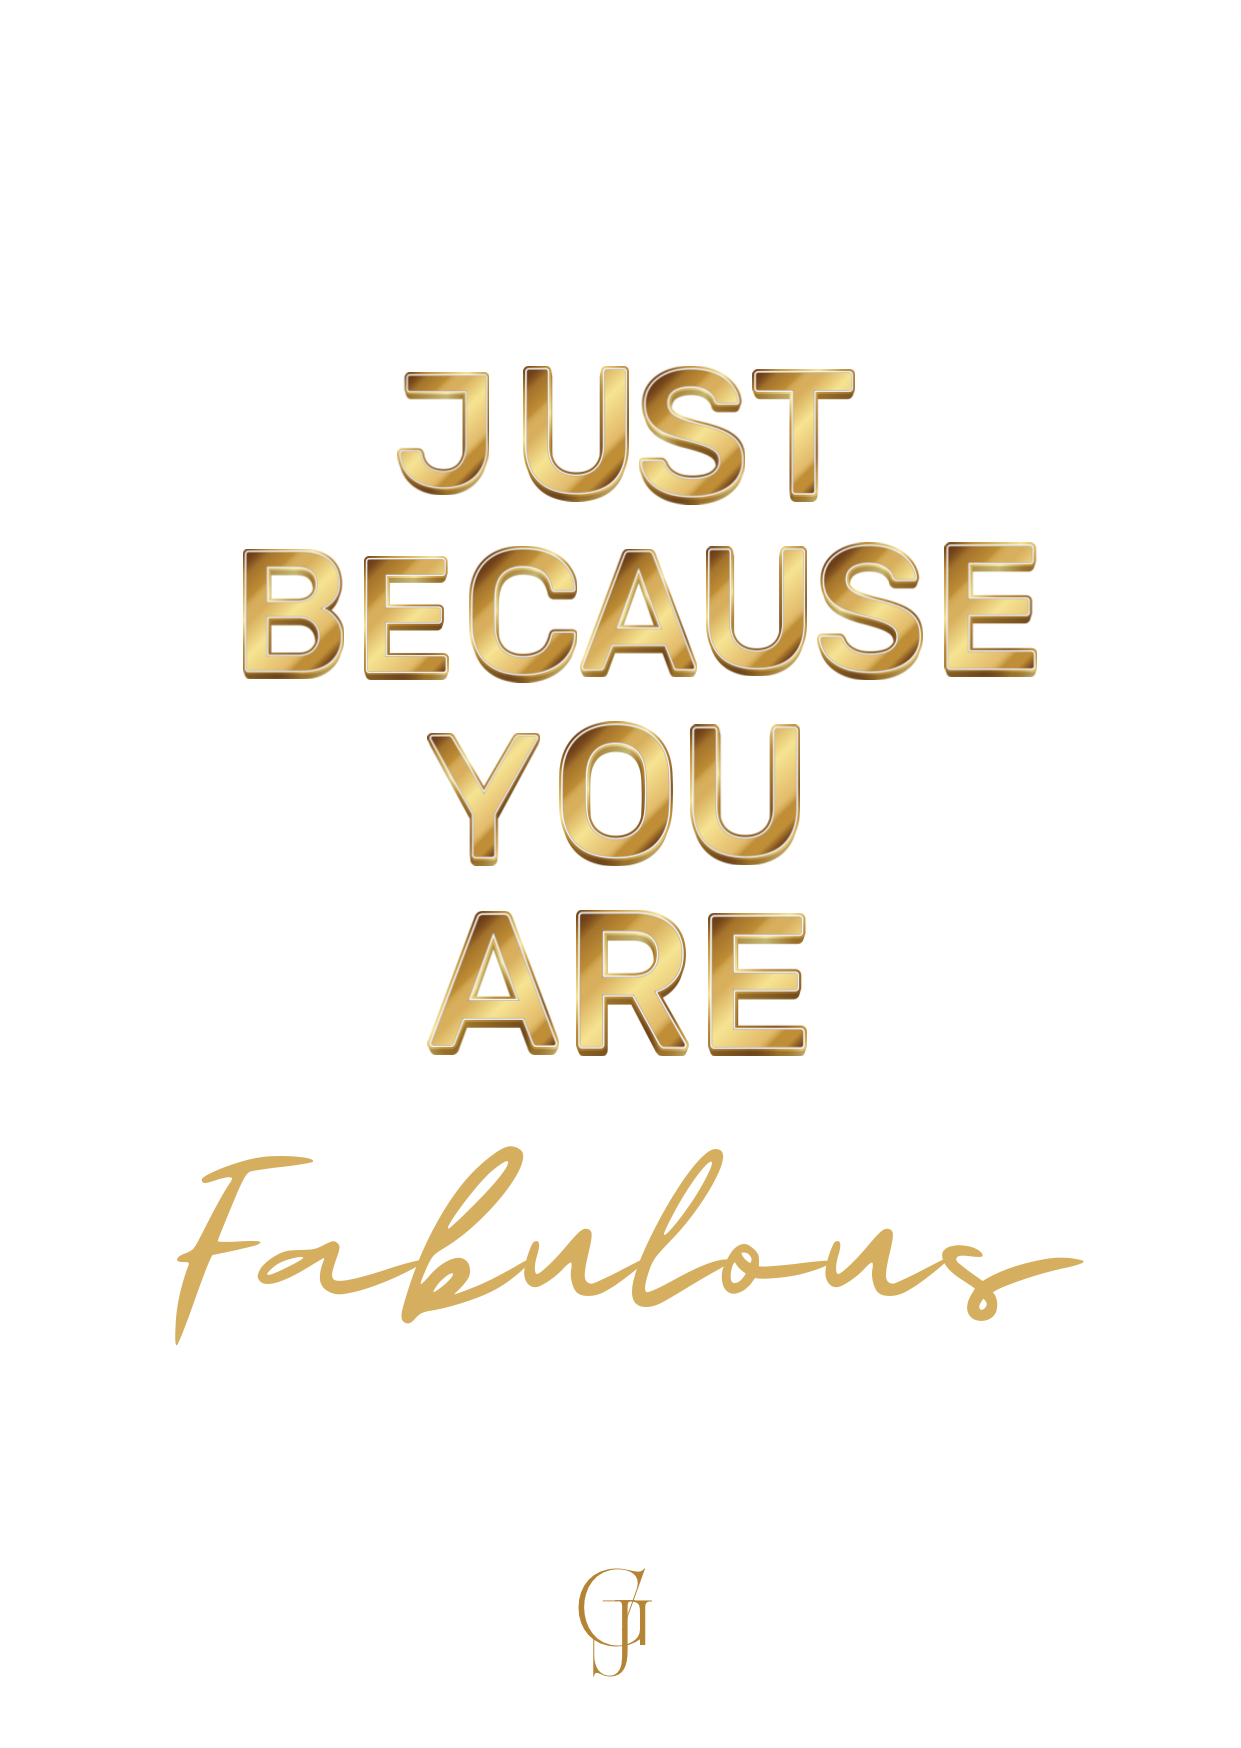 JUST BECAUSE YOU ARE FABULOUS CARD